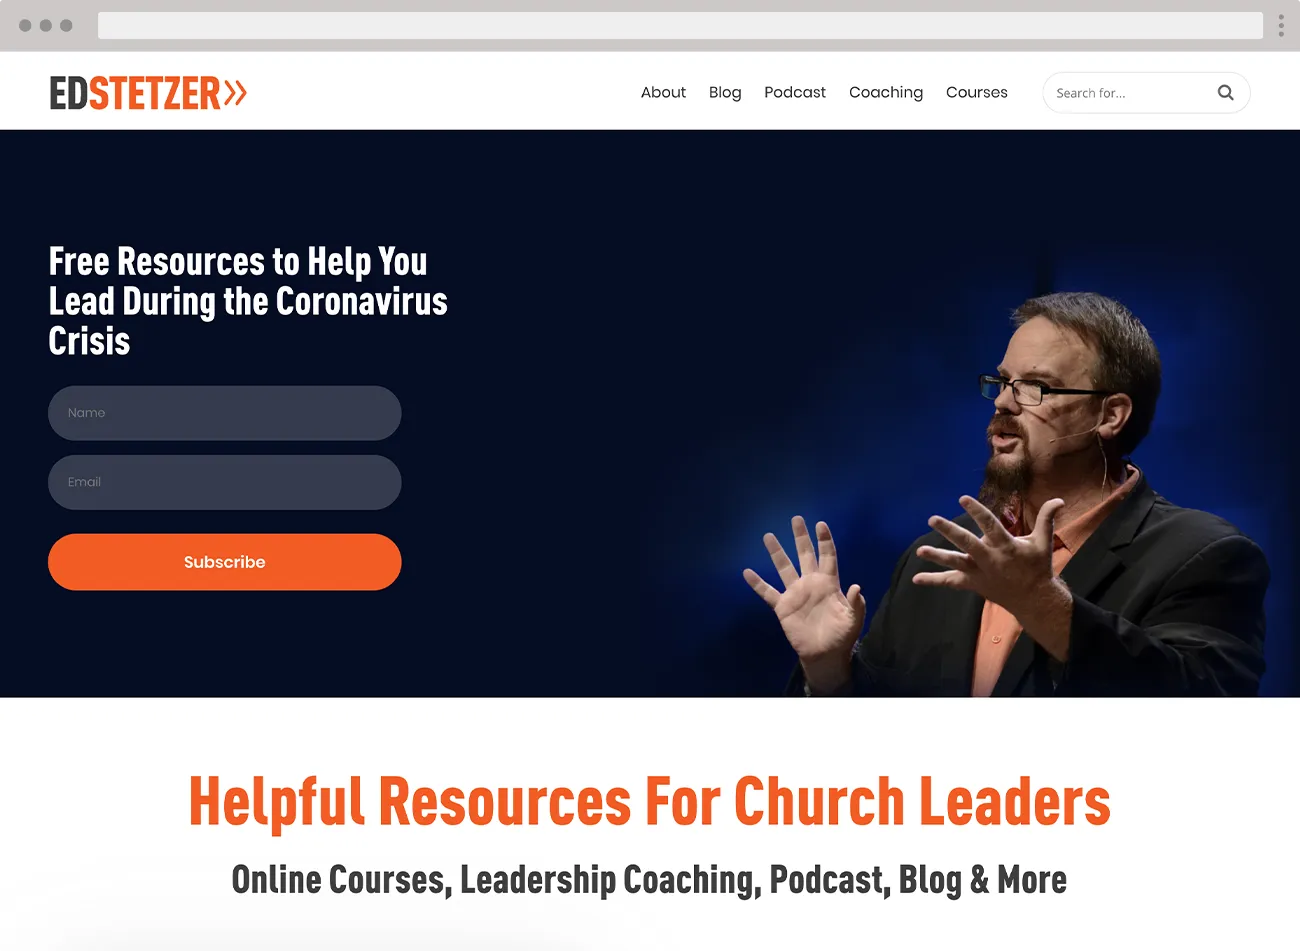 Review from Ed Stetzer about EdStetzer.com built on Churchly